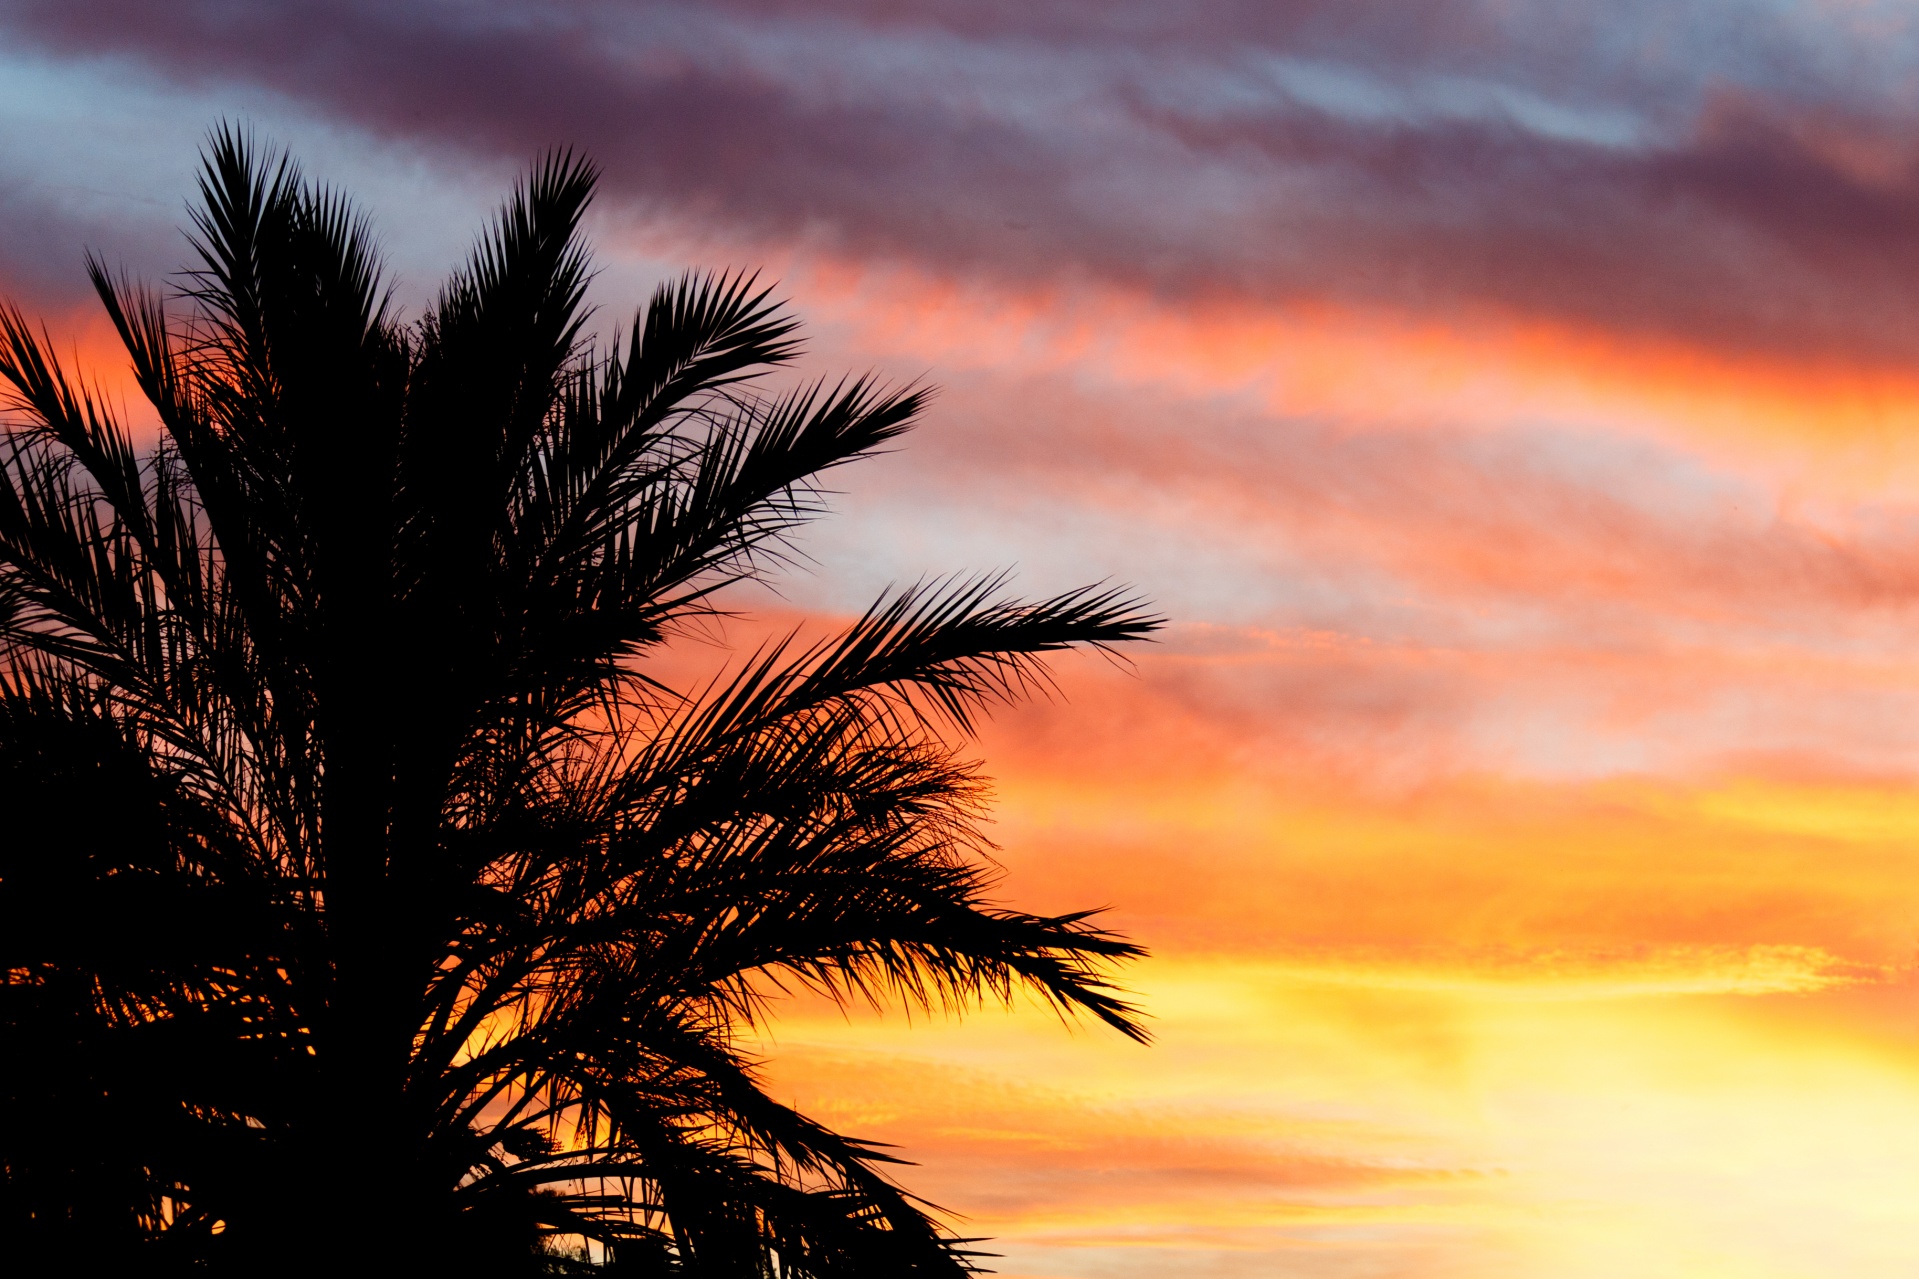 Palm Tree At Sunset Free Stock Photo Public Domain Pictures